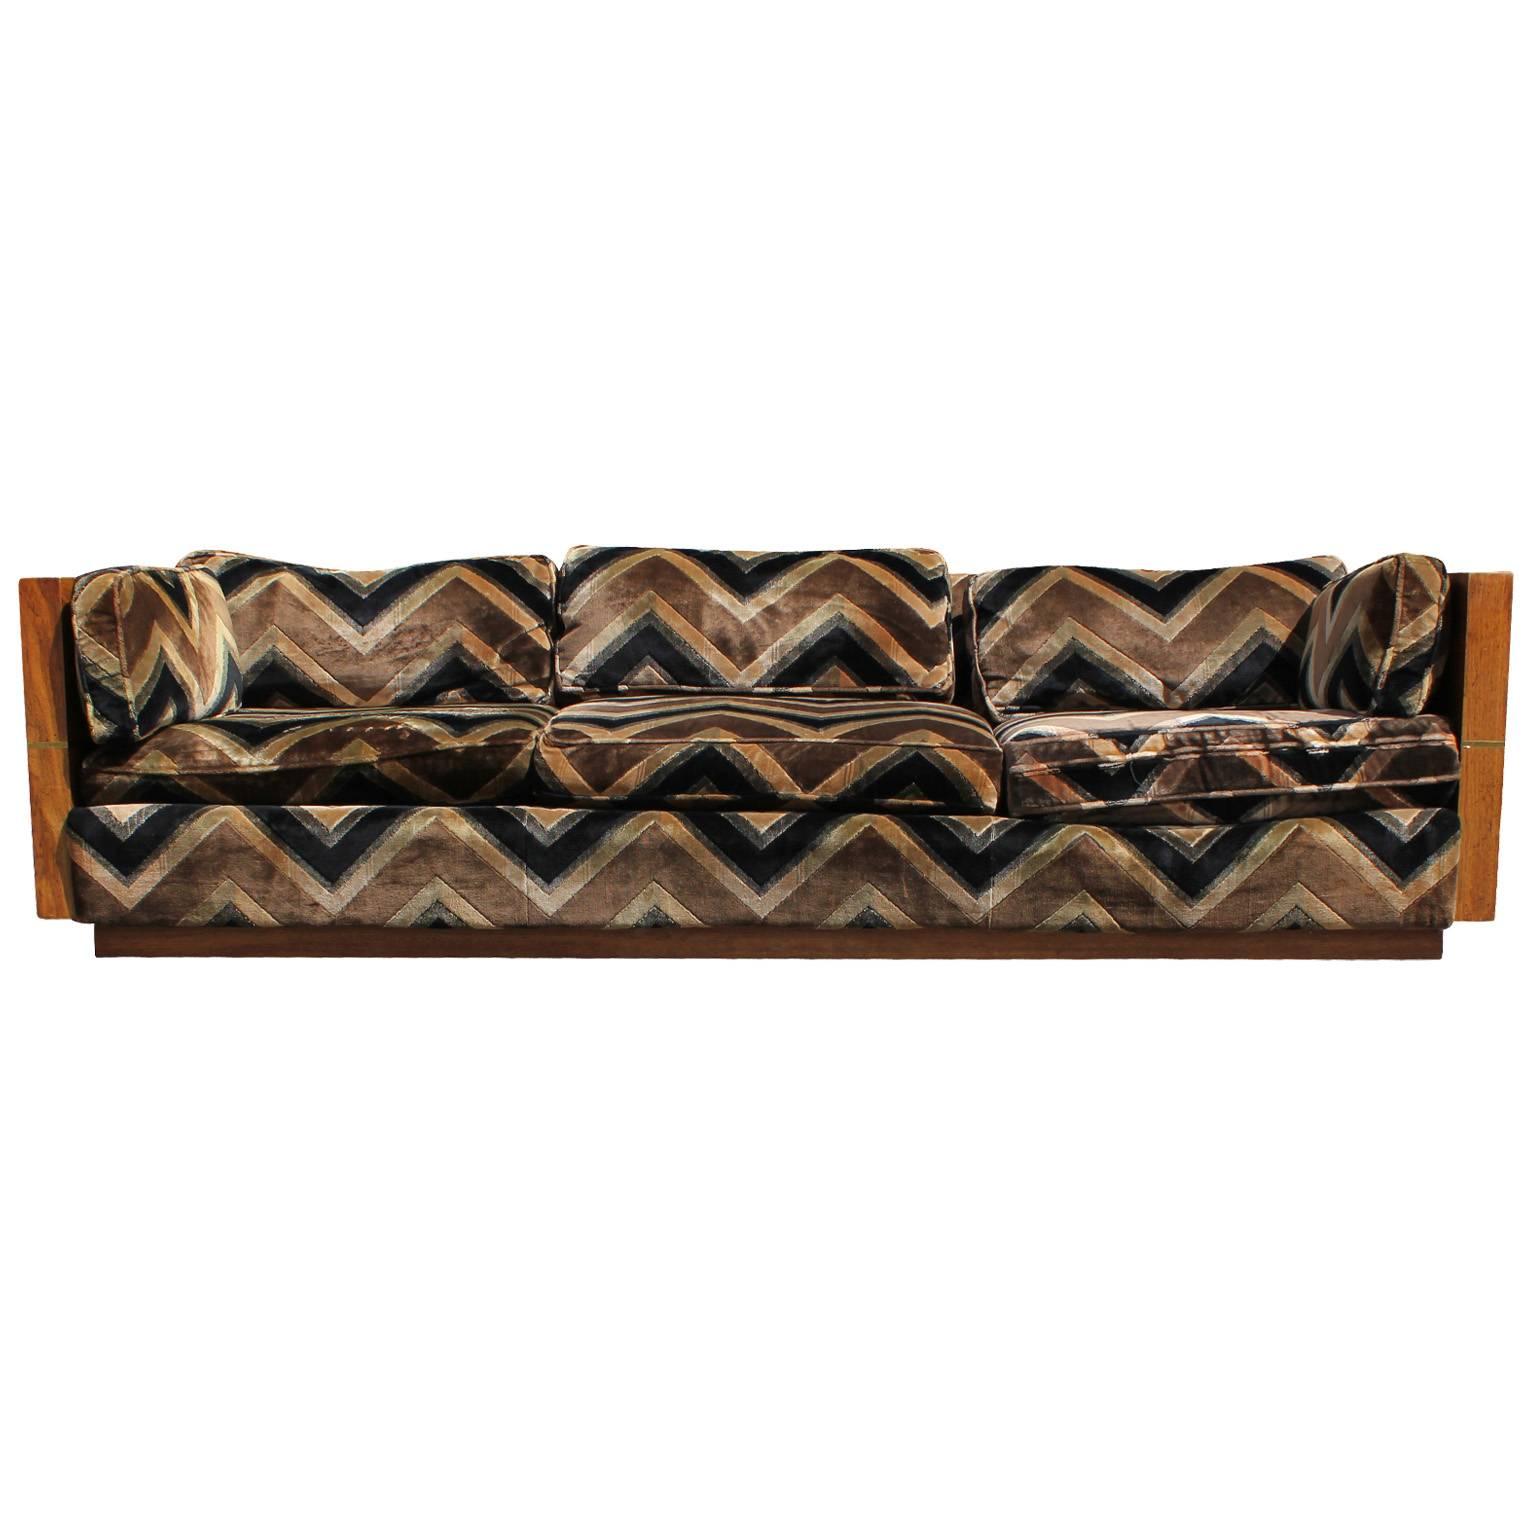 Incredible sofa attributed to Milo Baughman. Wood case has a striking grain and a brass strip grid overlay. Brass grid is peeling in one area and is easily removed. Upholstered in original chevron patterned velvet which needs updating. Matching love